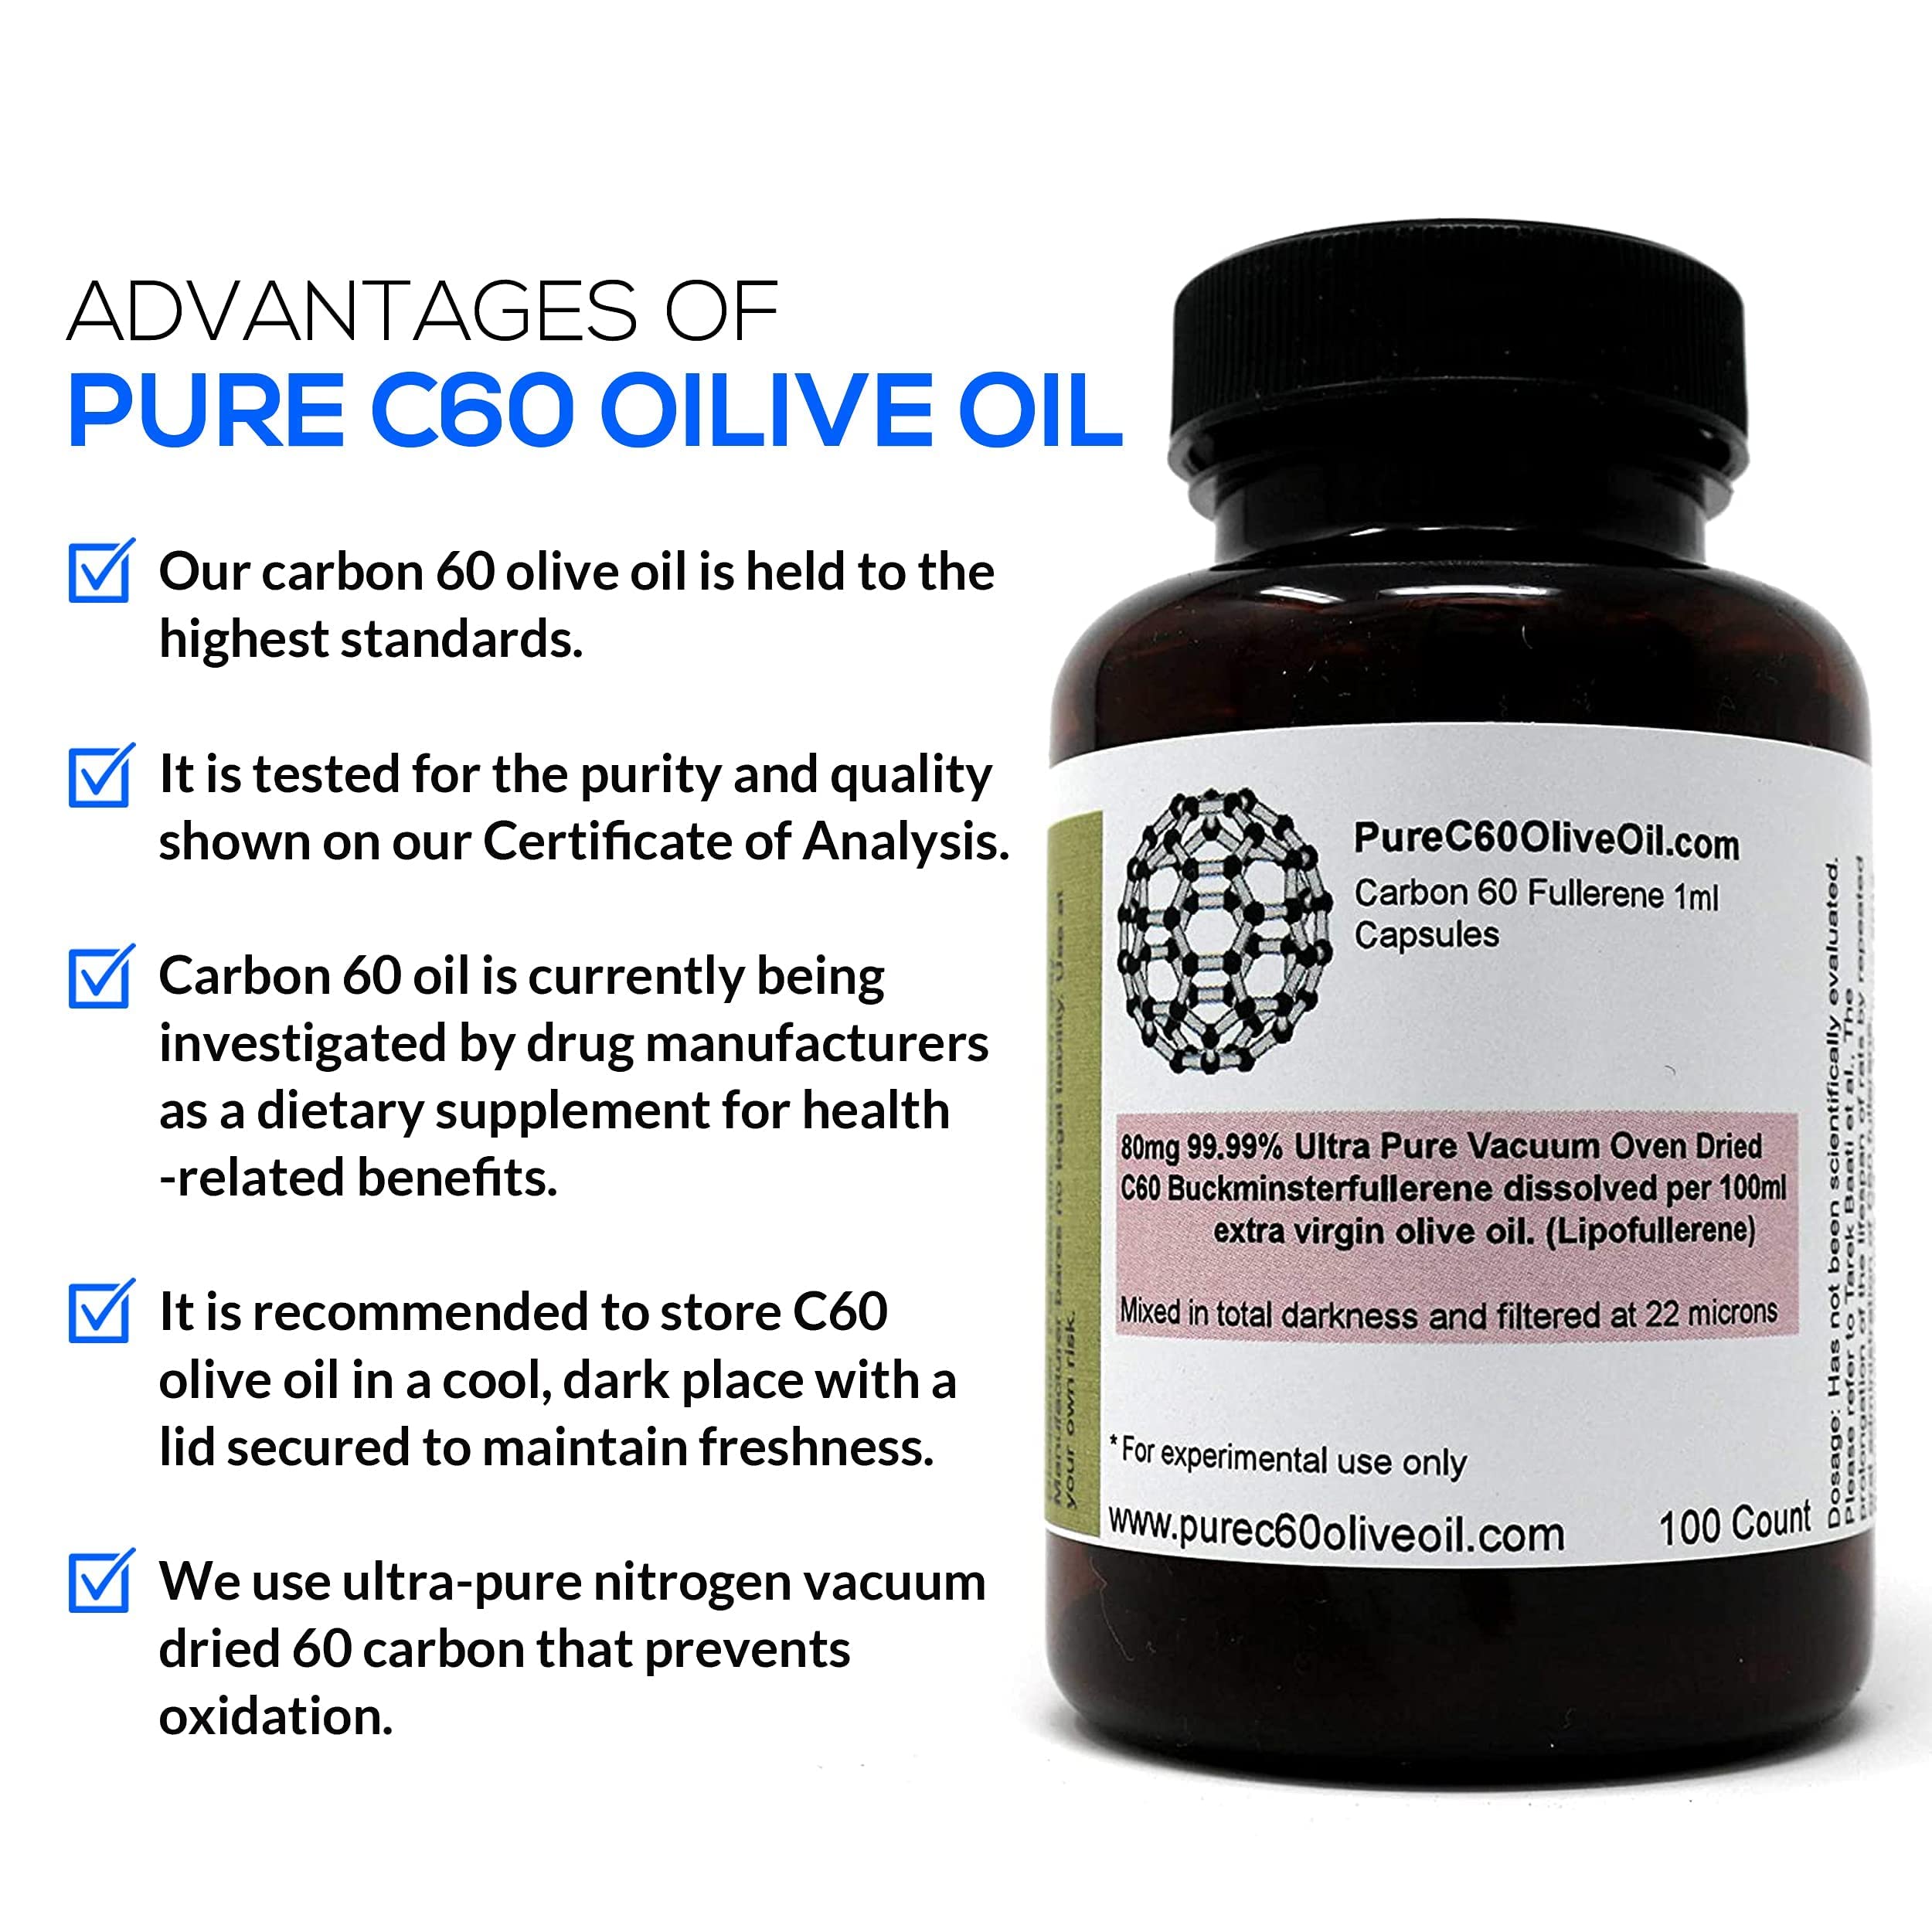 PureC60OliveOil C60 Olive Oil Capsules Pills 100ml / 3.4 Fl Oz - 99.99% Carbon 60 Solvent Free 80mg - Food Grade - Carbon 60 Olive Oil - From The Leading Global Producer